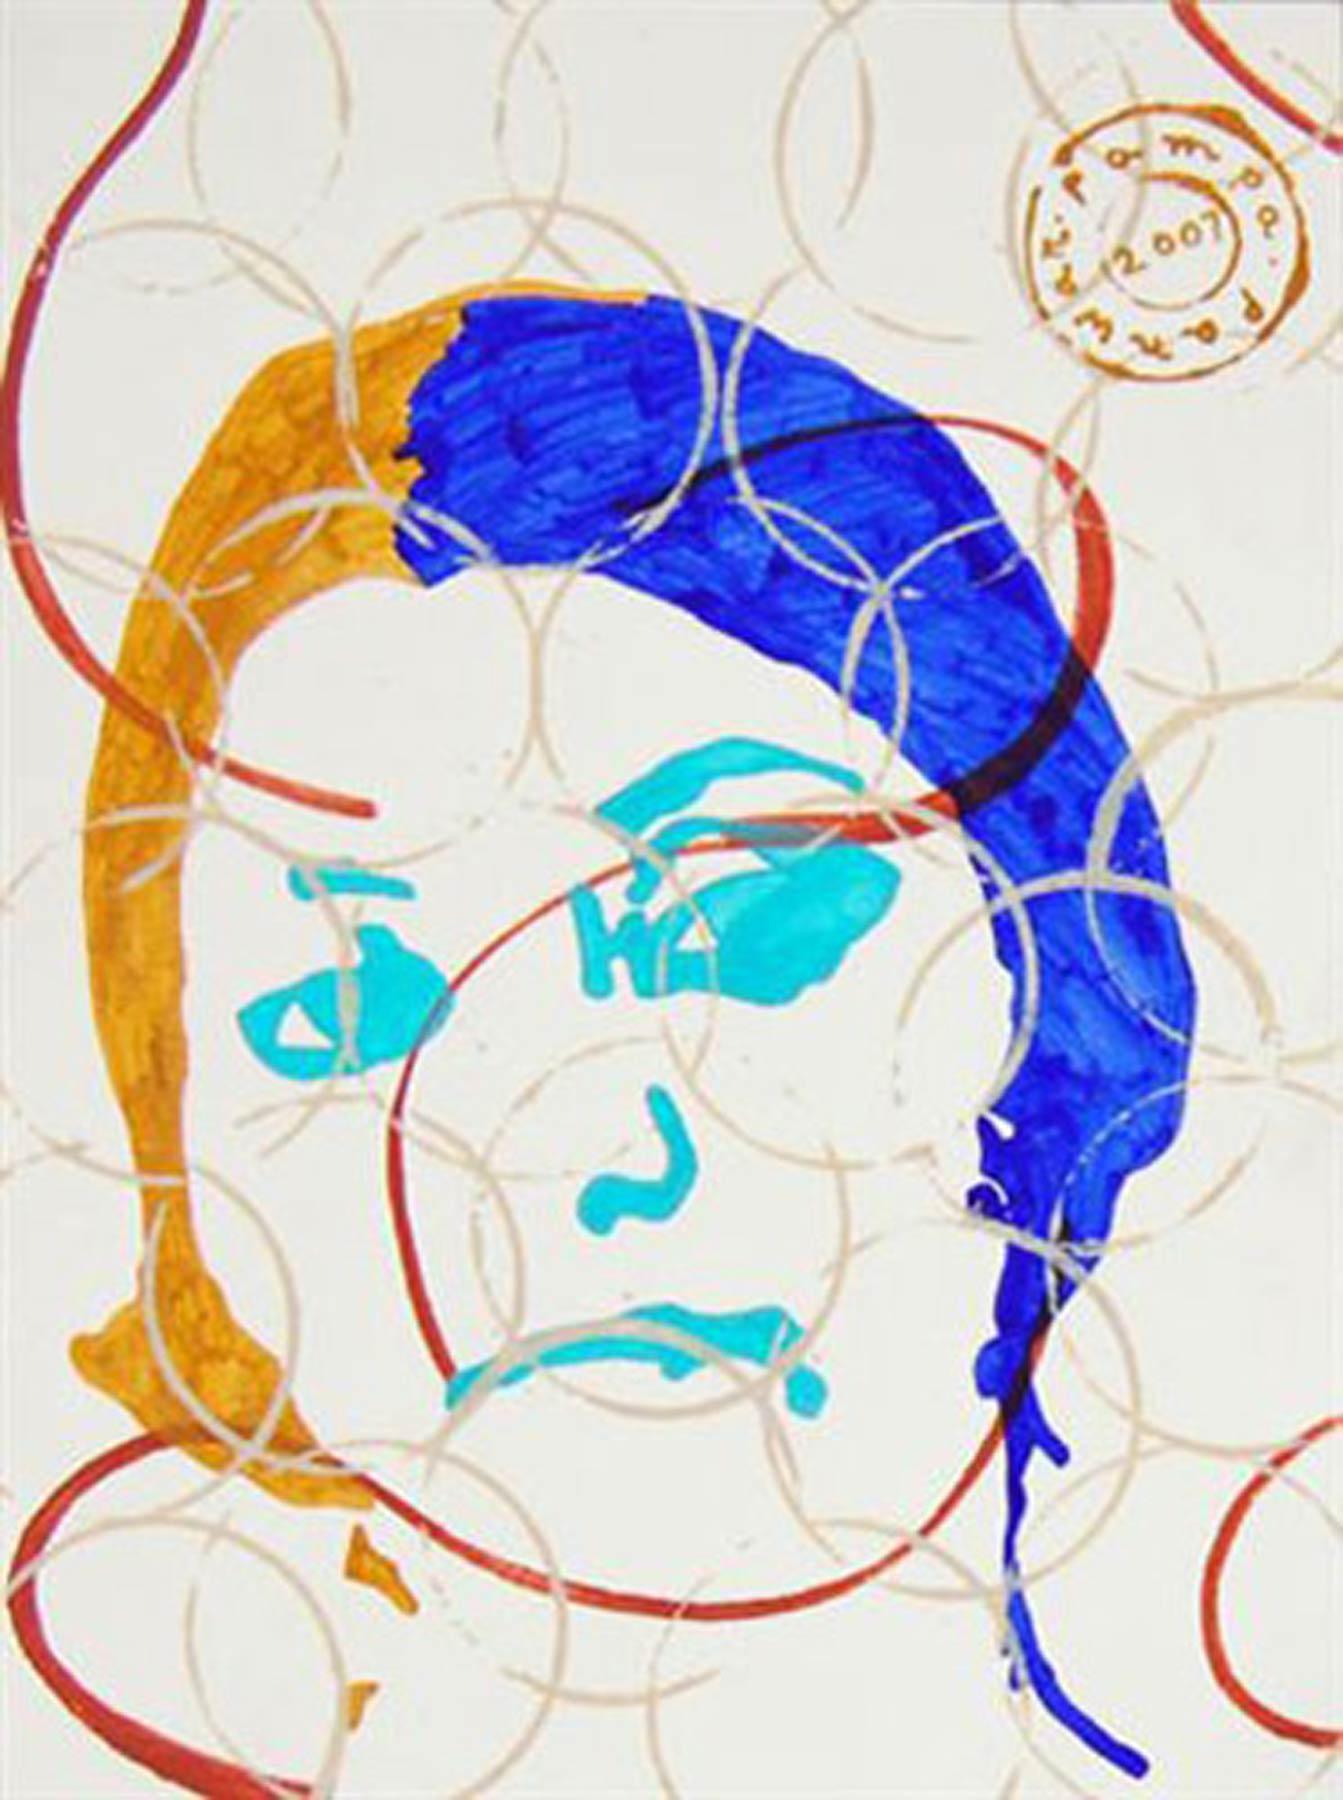 Pampa Panwar Figurative Art - Women Face, Acrylic Painting, Blue, Brown, Red by Indian Artist "In Stock"